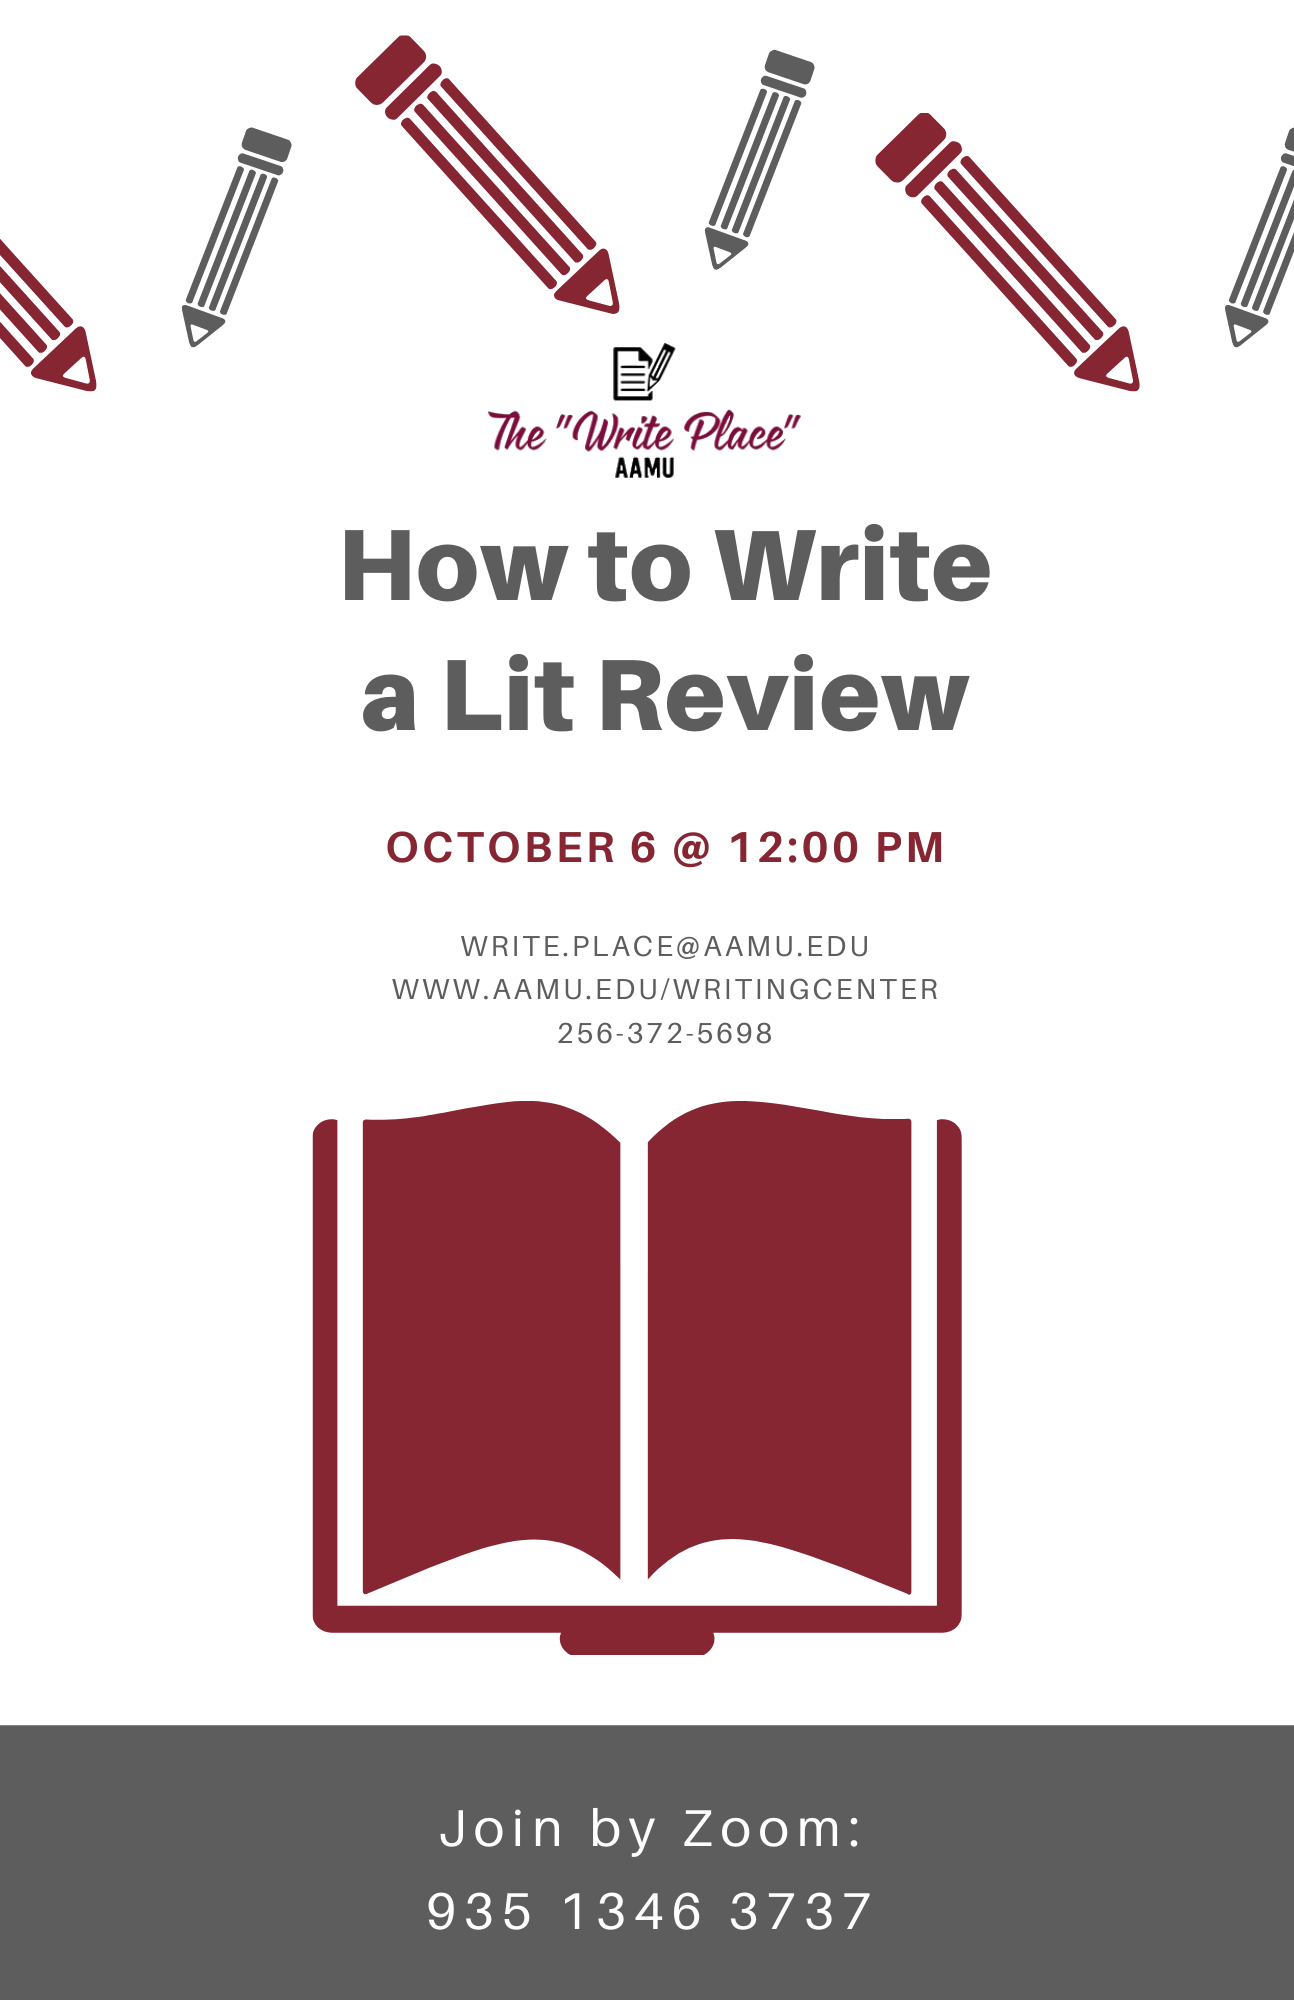 How to Write a Lit Review